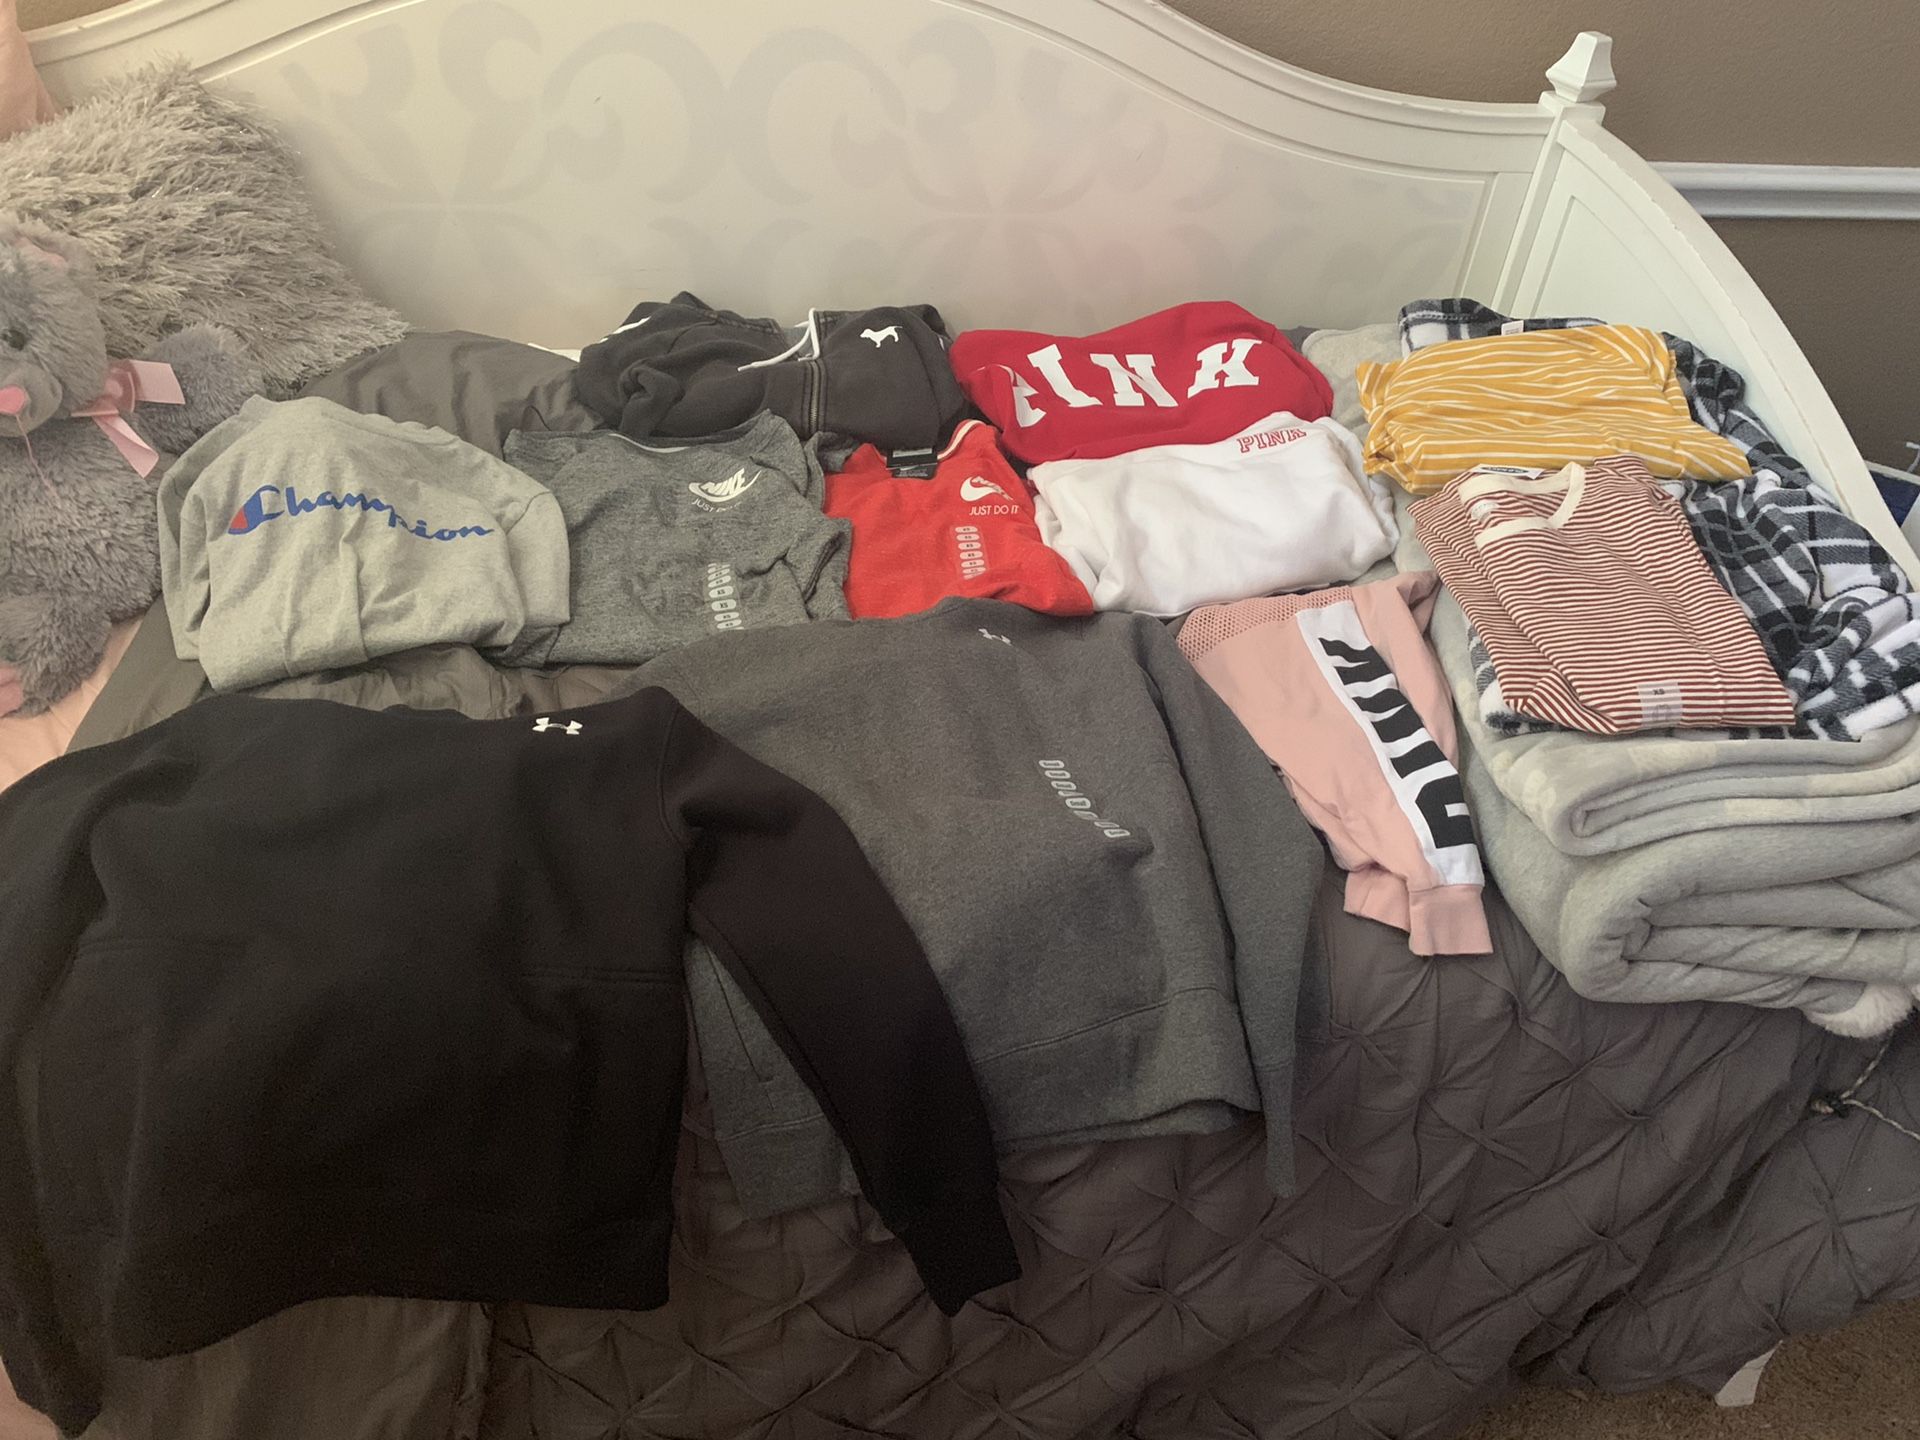 Brand new hoodies and shirts and jackets (Nike,champion,old navy,PINK)